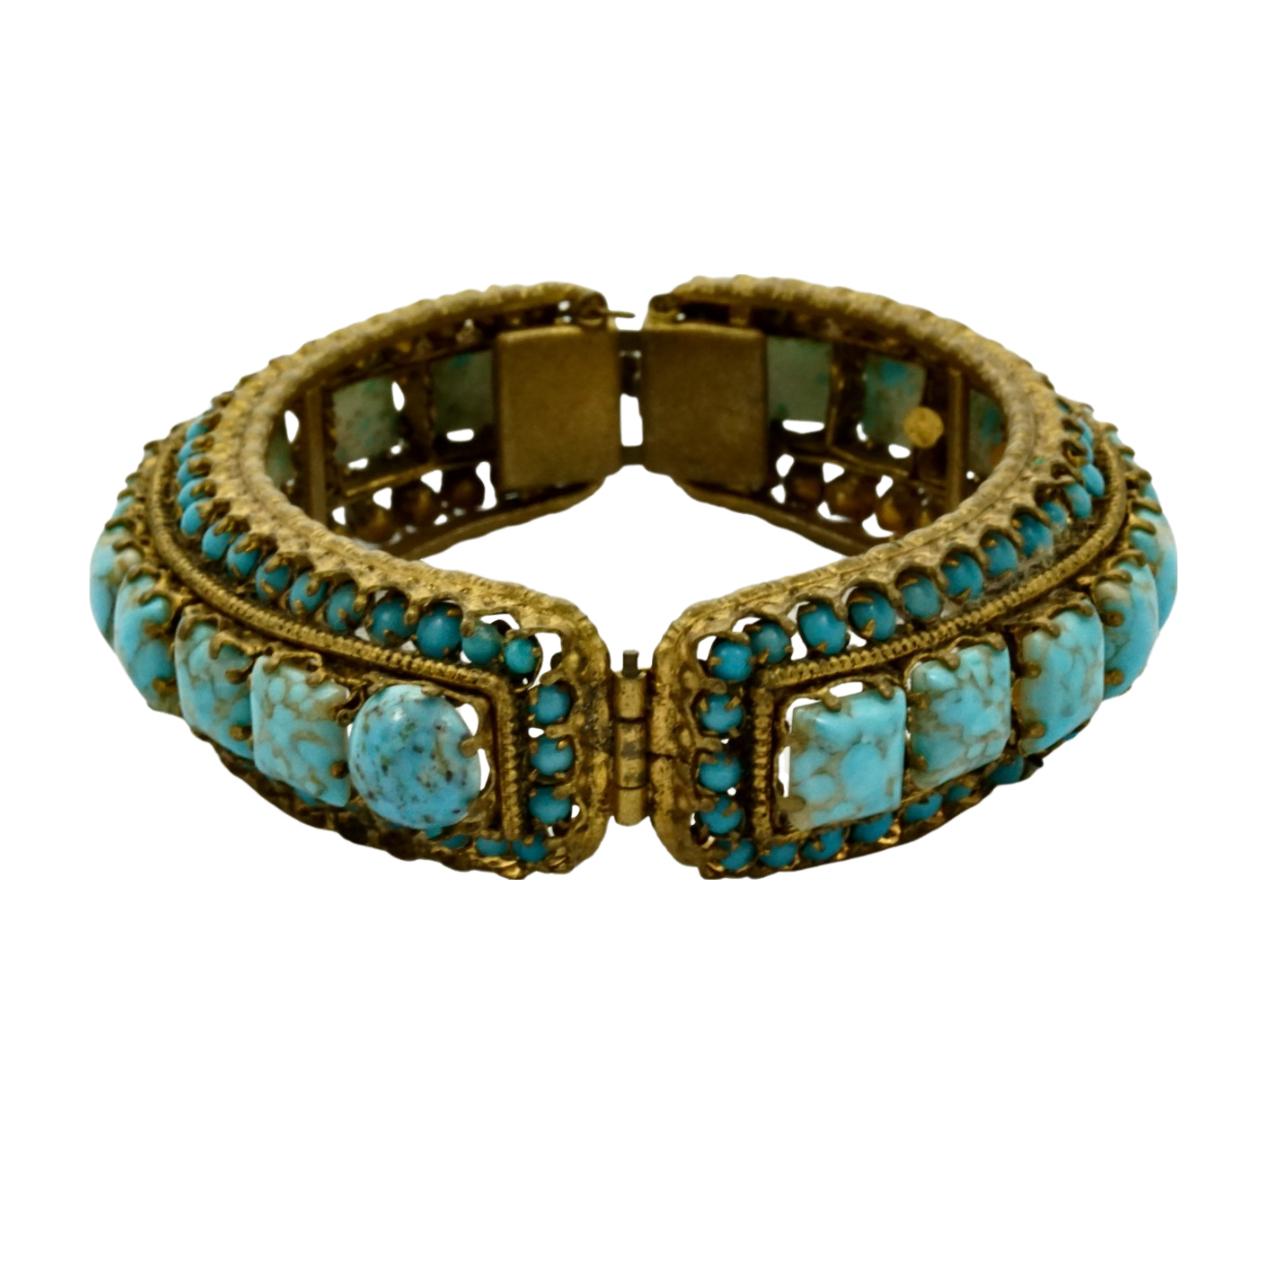 Gold Plated and Black Enamel Bangle Bracelet with Faux Turquoise Stones In Good Condition For Sale In London, GB